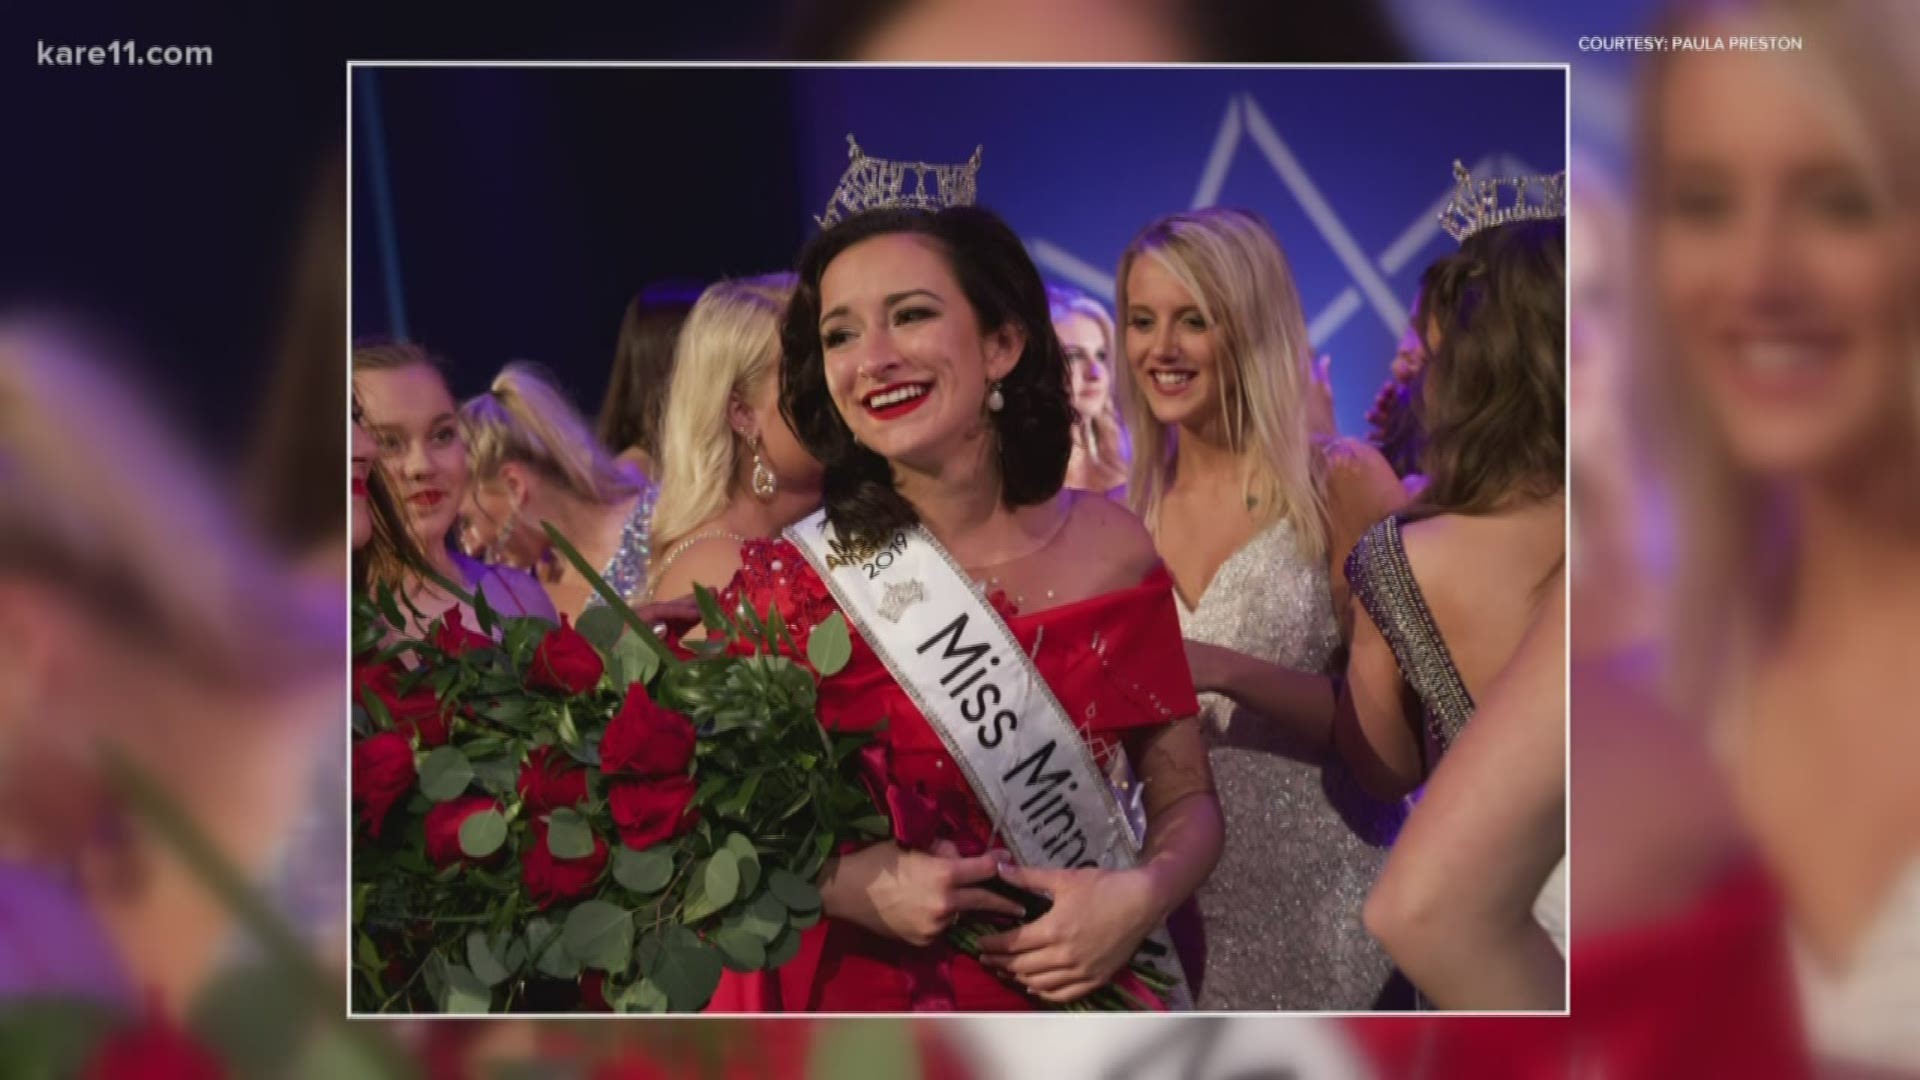 We caught up with Kathryn Kueppers to talk about how her year is going as Miss Minnesota 2019.